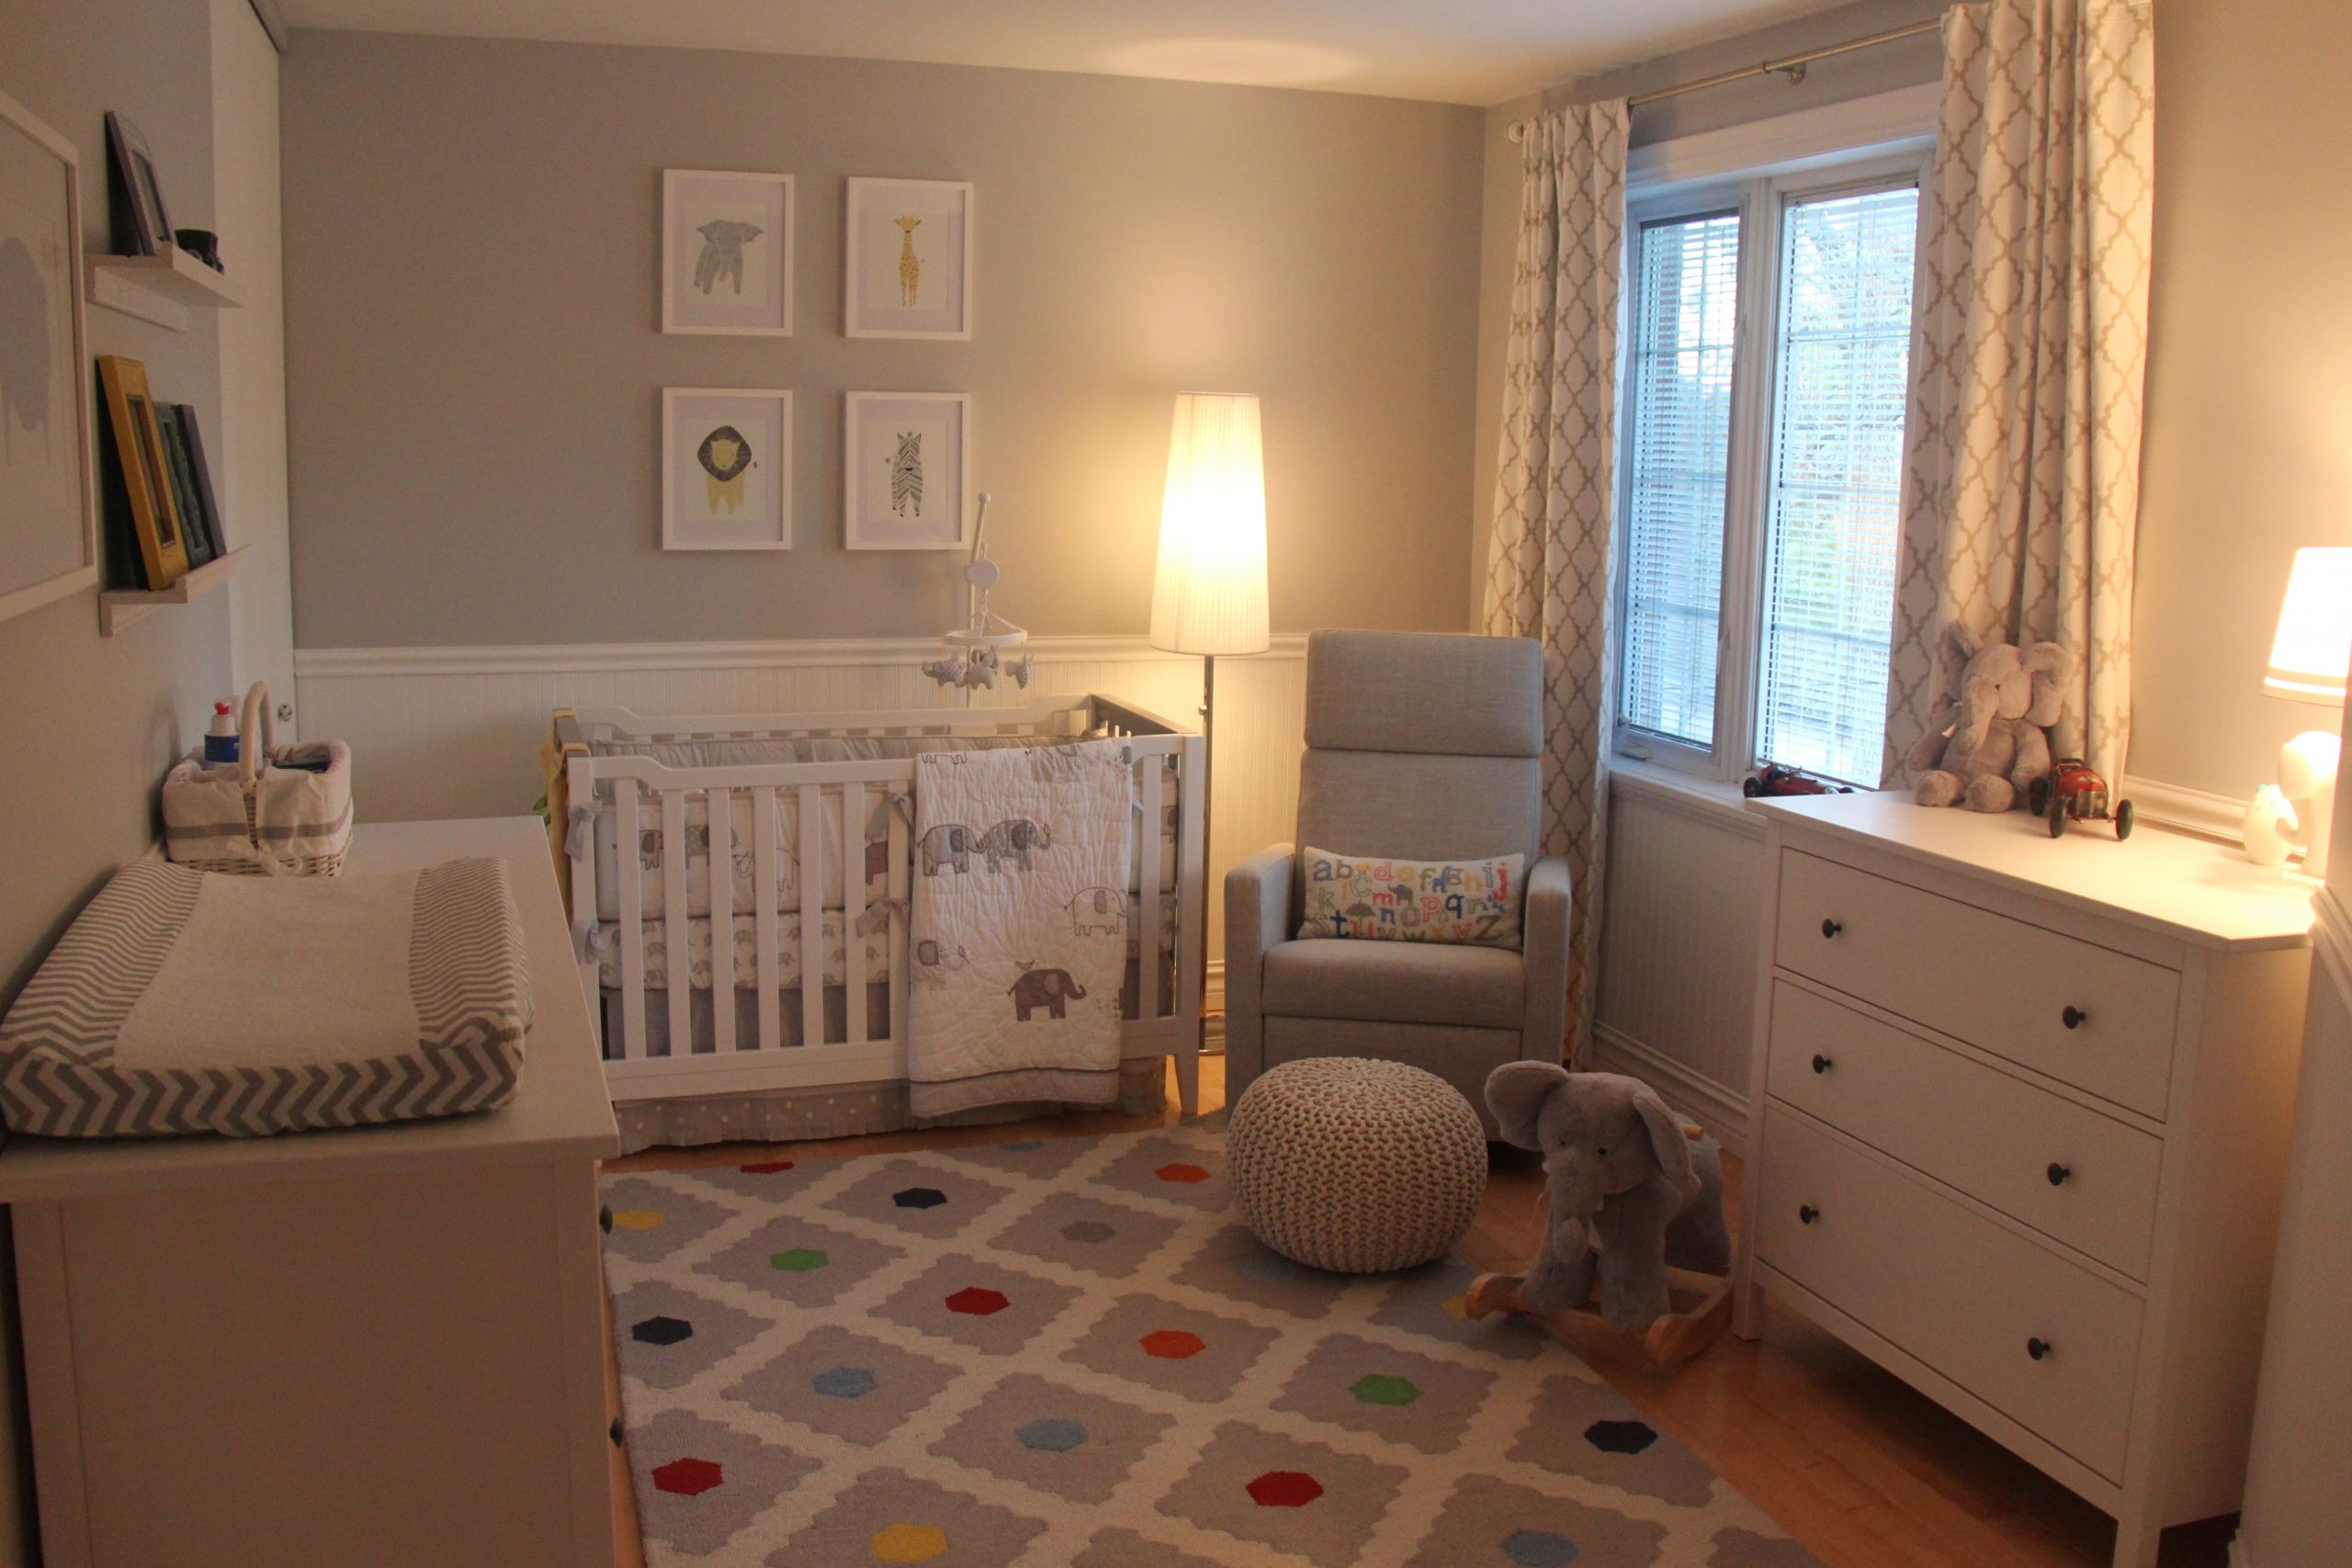 Baby Boy Room Decor
 Our Little Baby Boy s Neutral Room Project Nursery